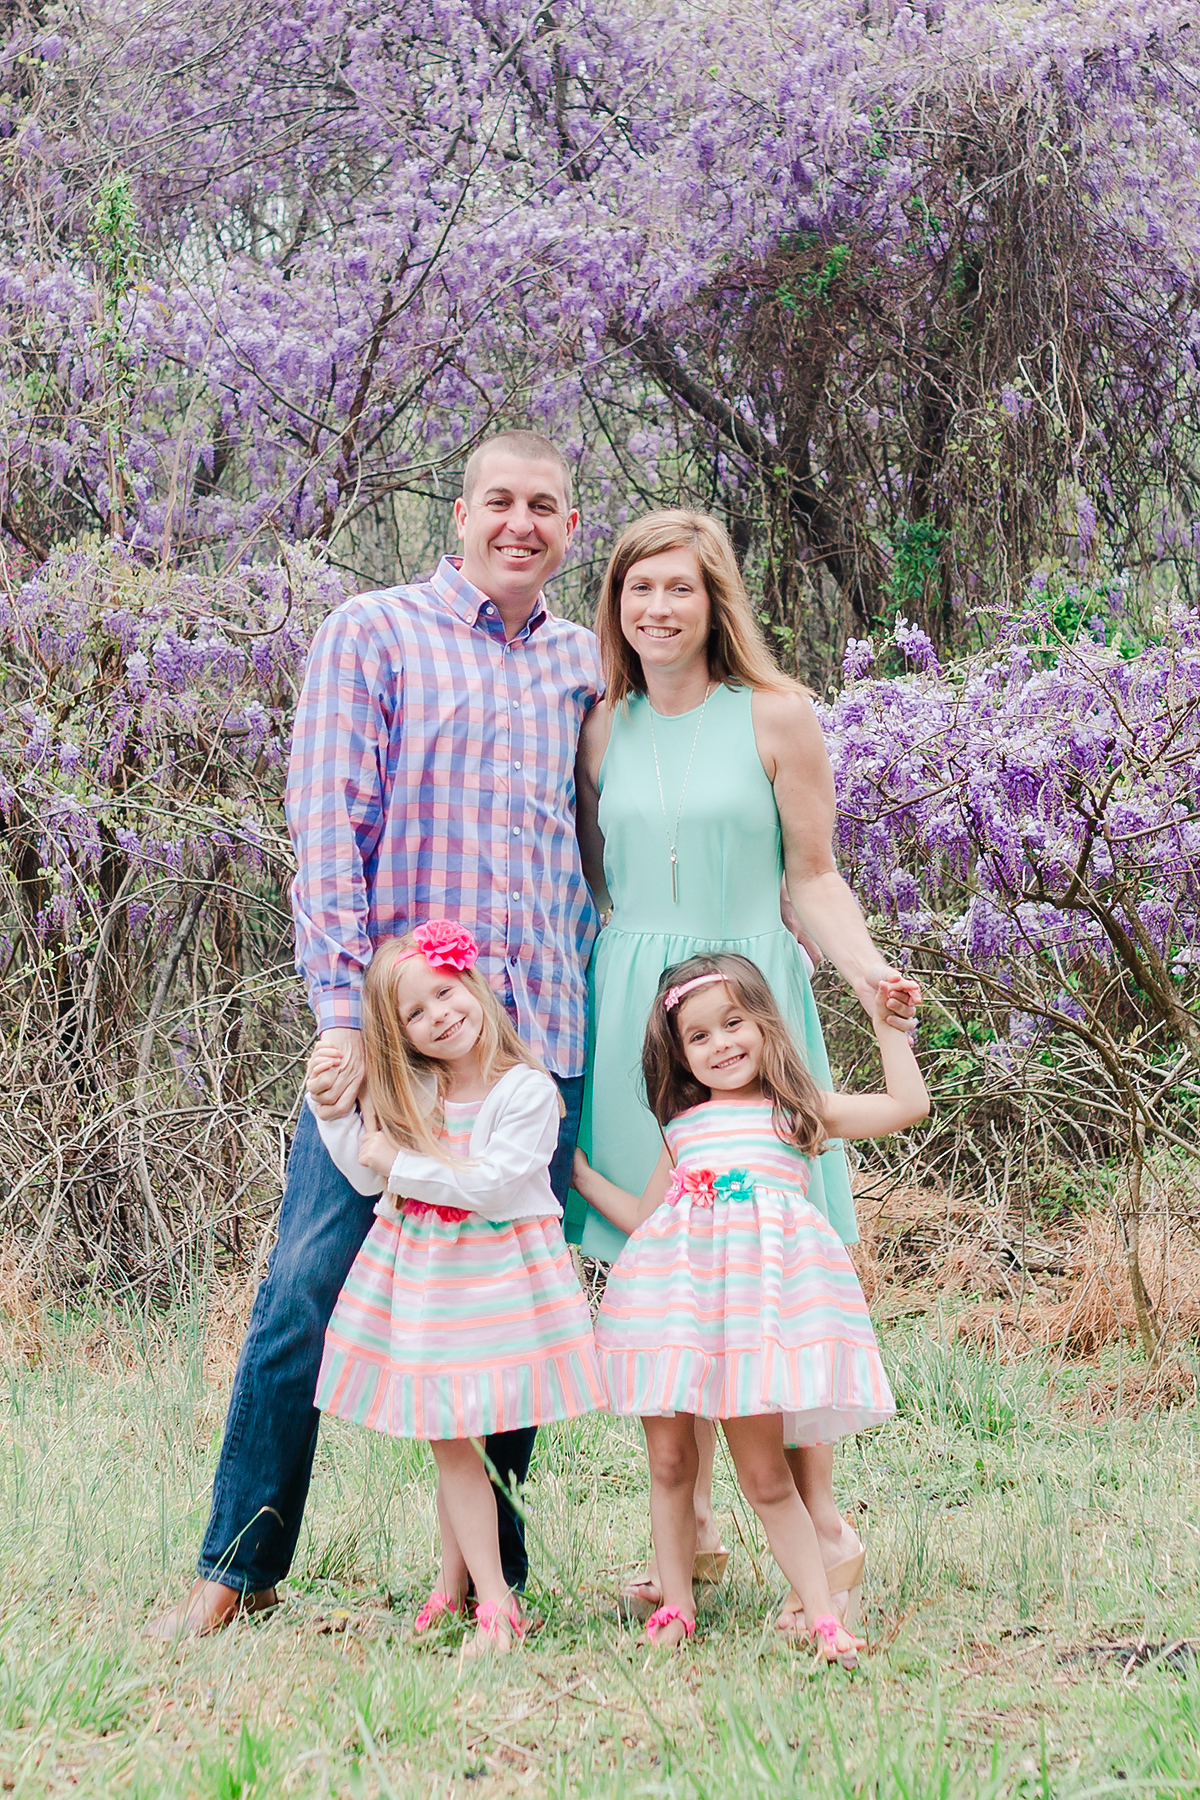 Happy Easter from Raleigh Family Photographer Traci Huffman Photography and Family